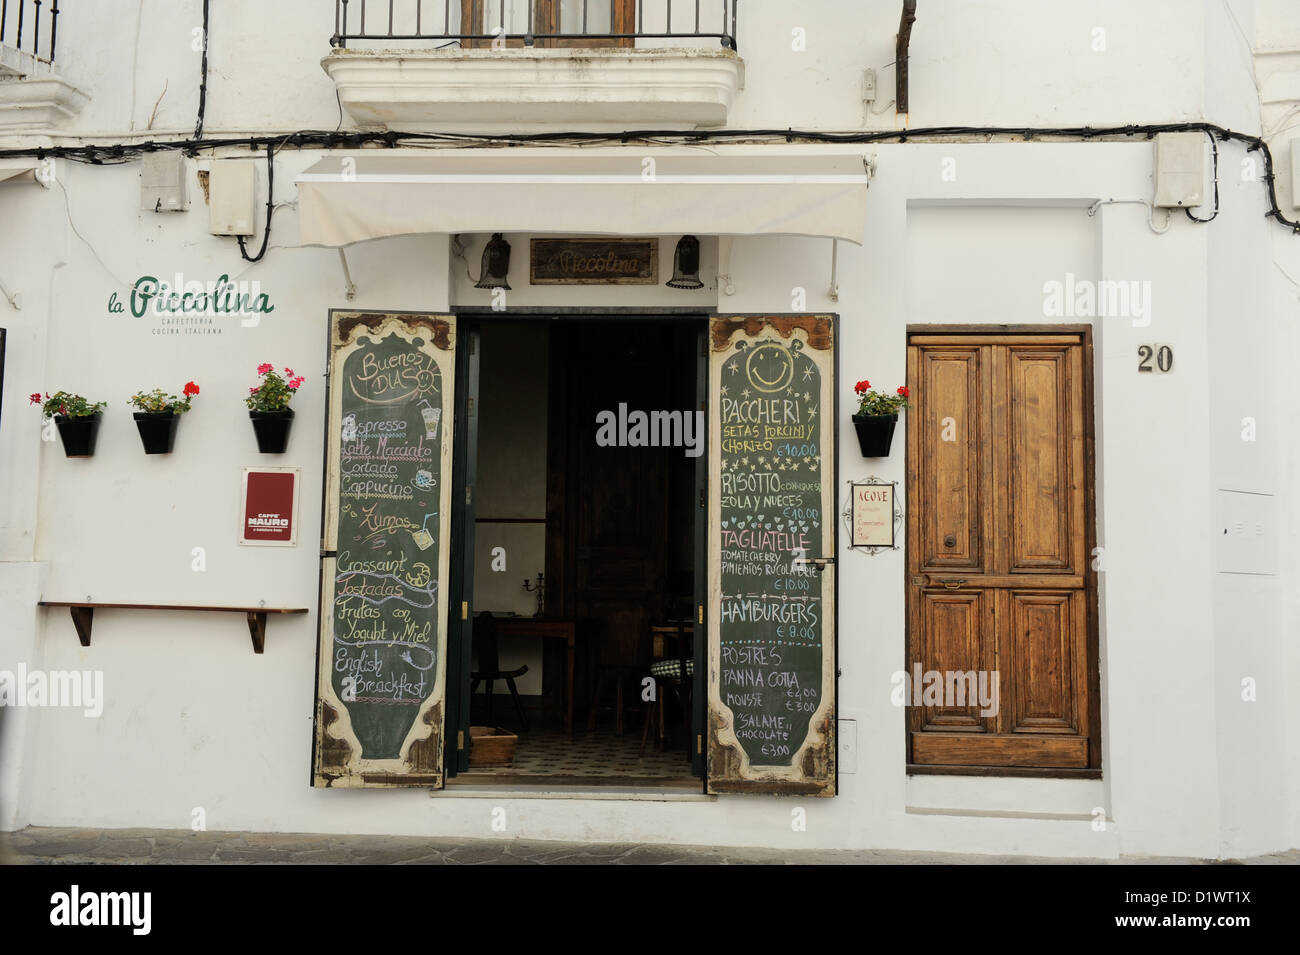 Italian Cafe in Vejer de la Frontera, one of the Pueblos Blancos or White Towns of Andalusia, Spain Stock Photo